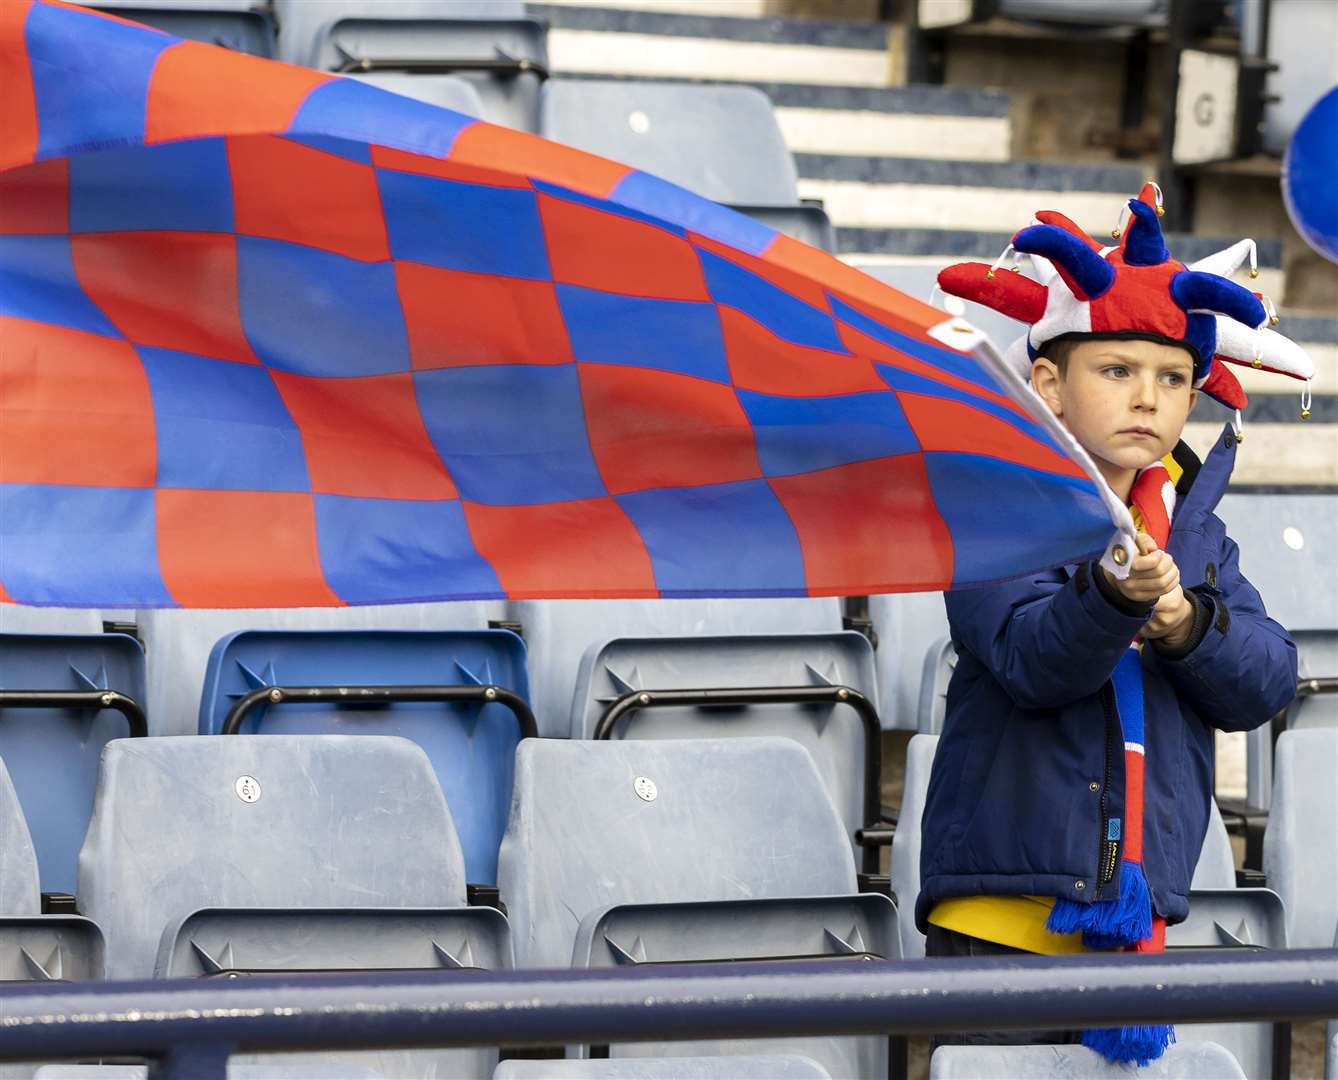 A young fan and his flag.